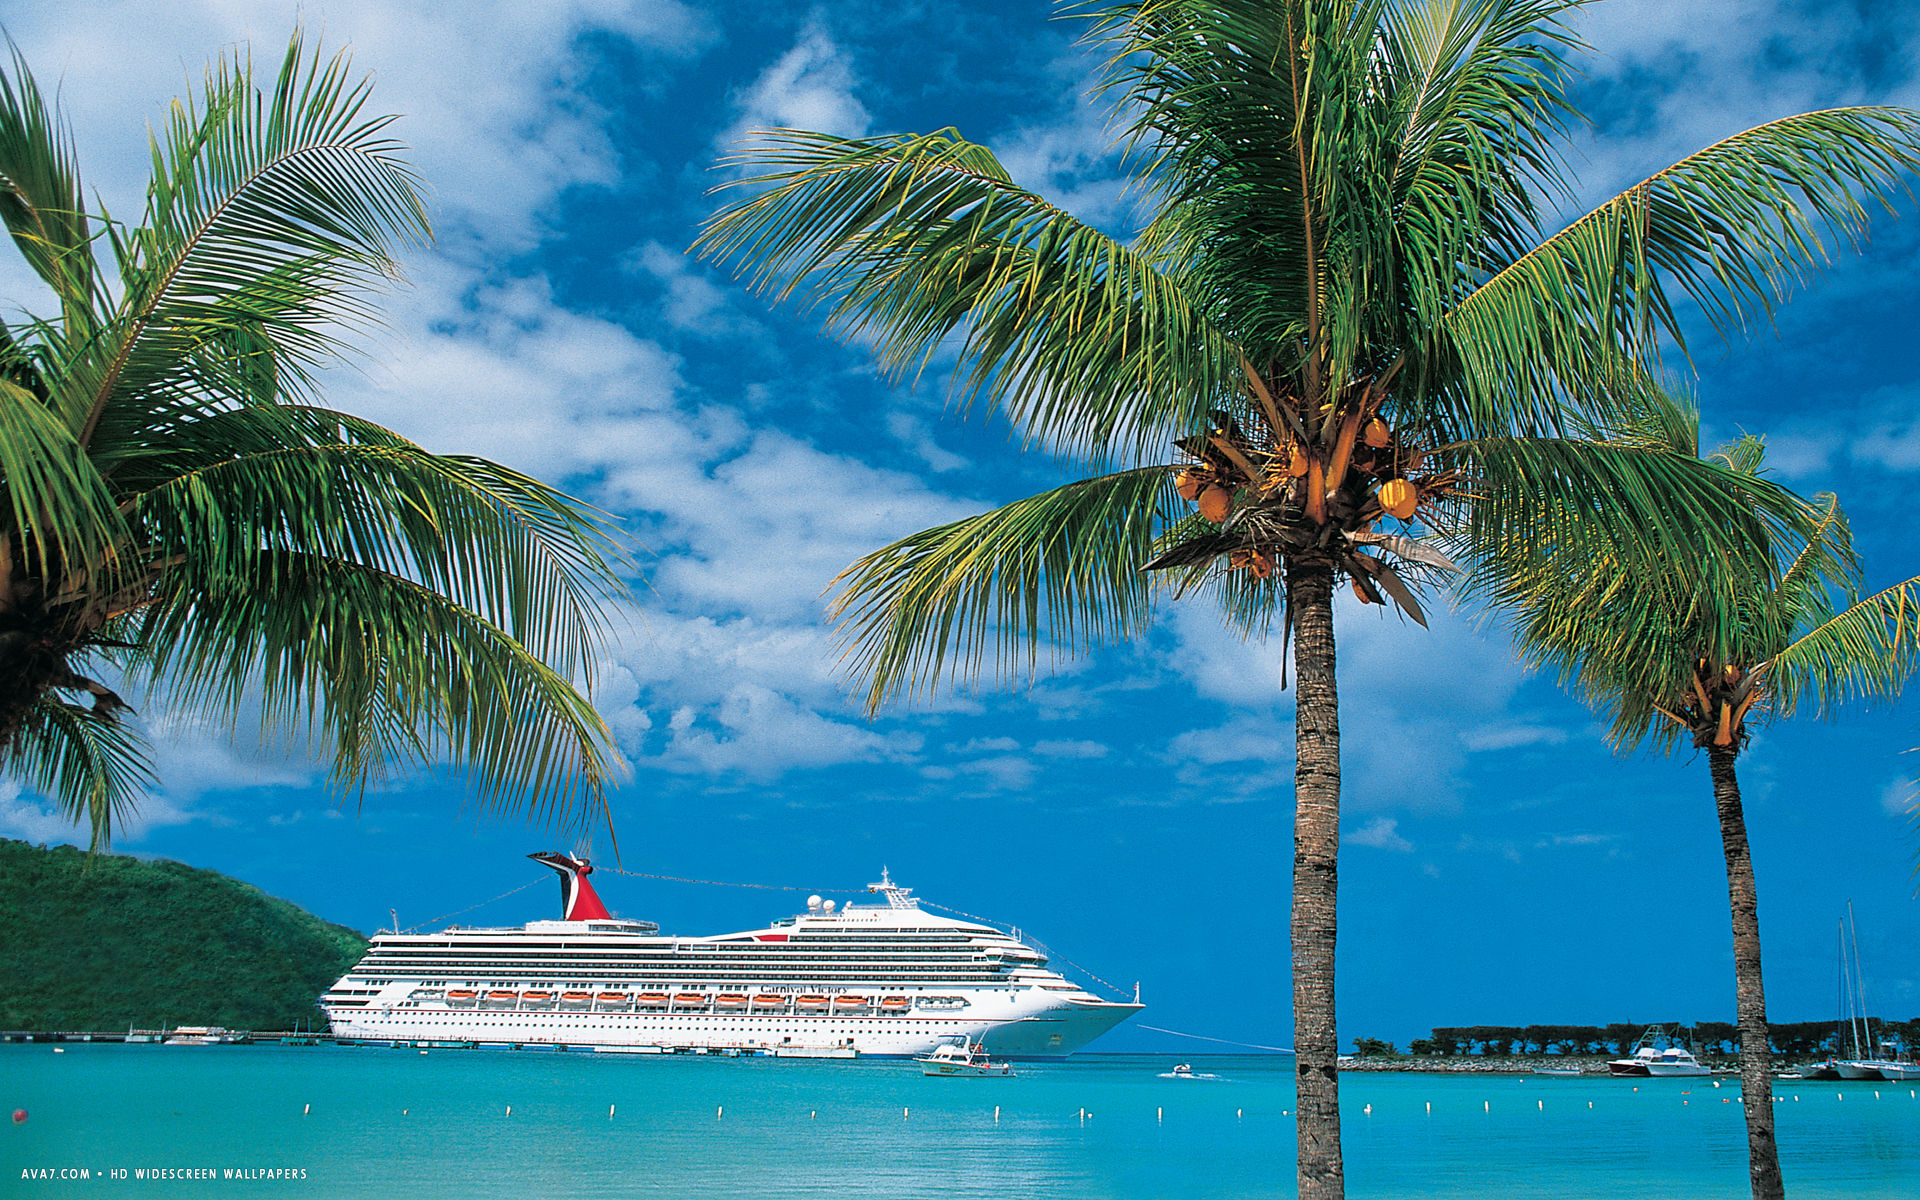 Carnival Freedom Wallpapers